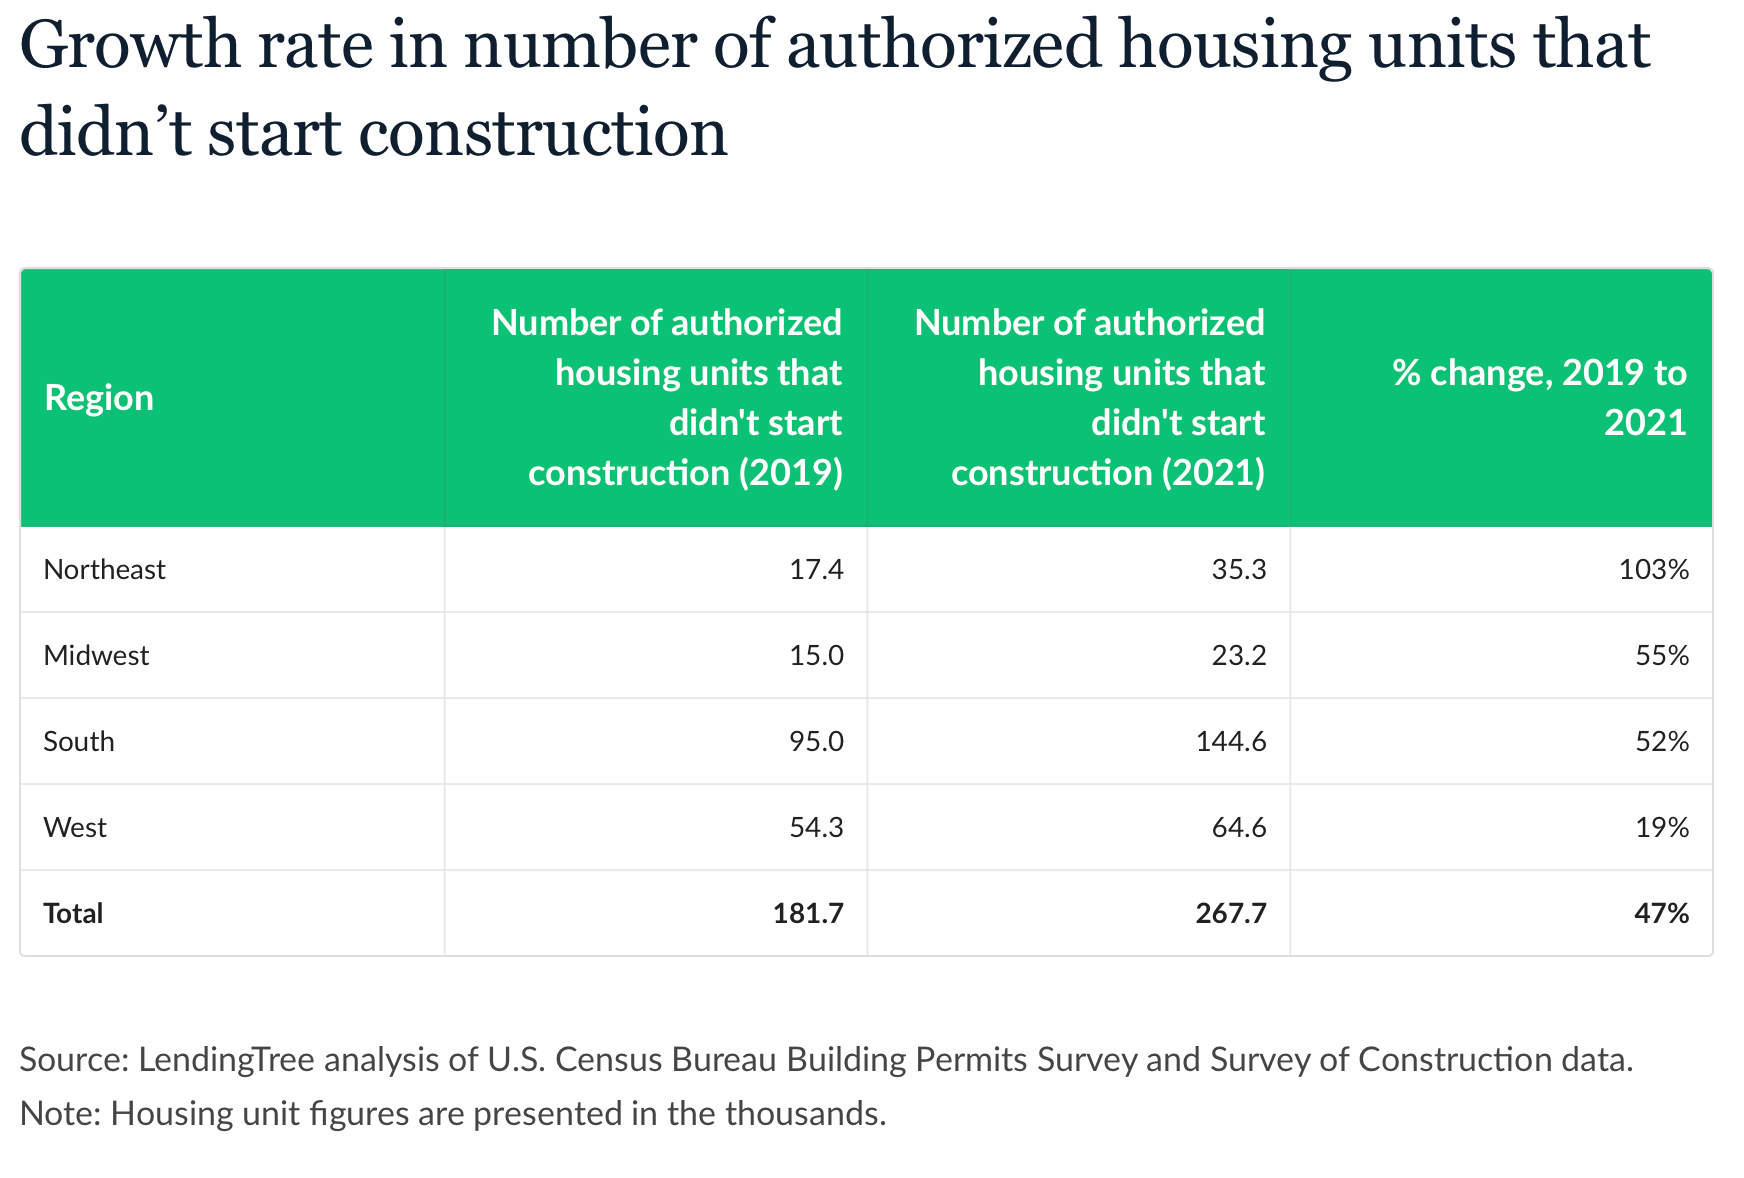 A table charting the growth rate in the number of authorized housing units that didn't start construction.